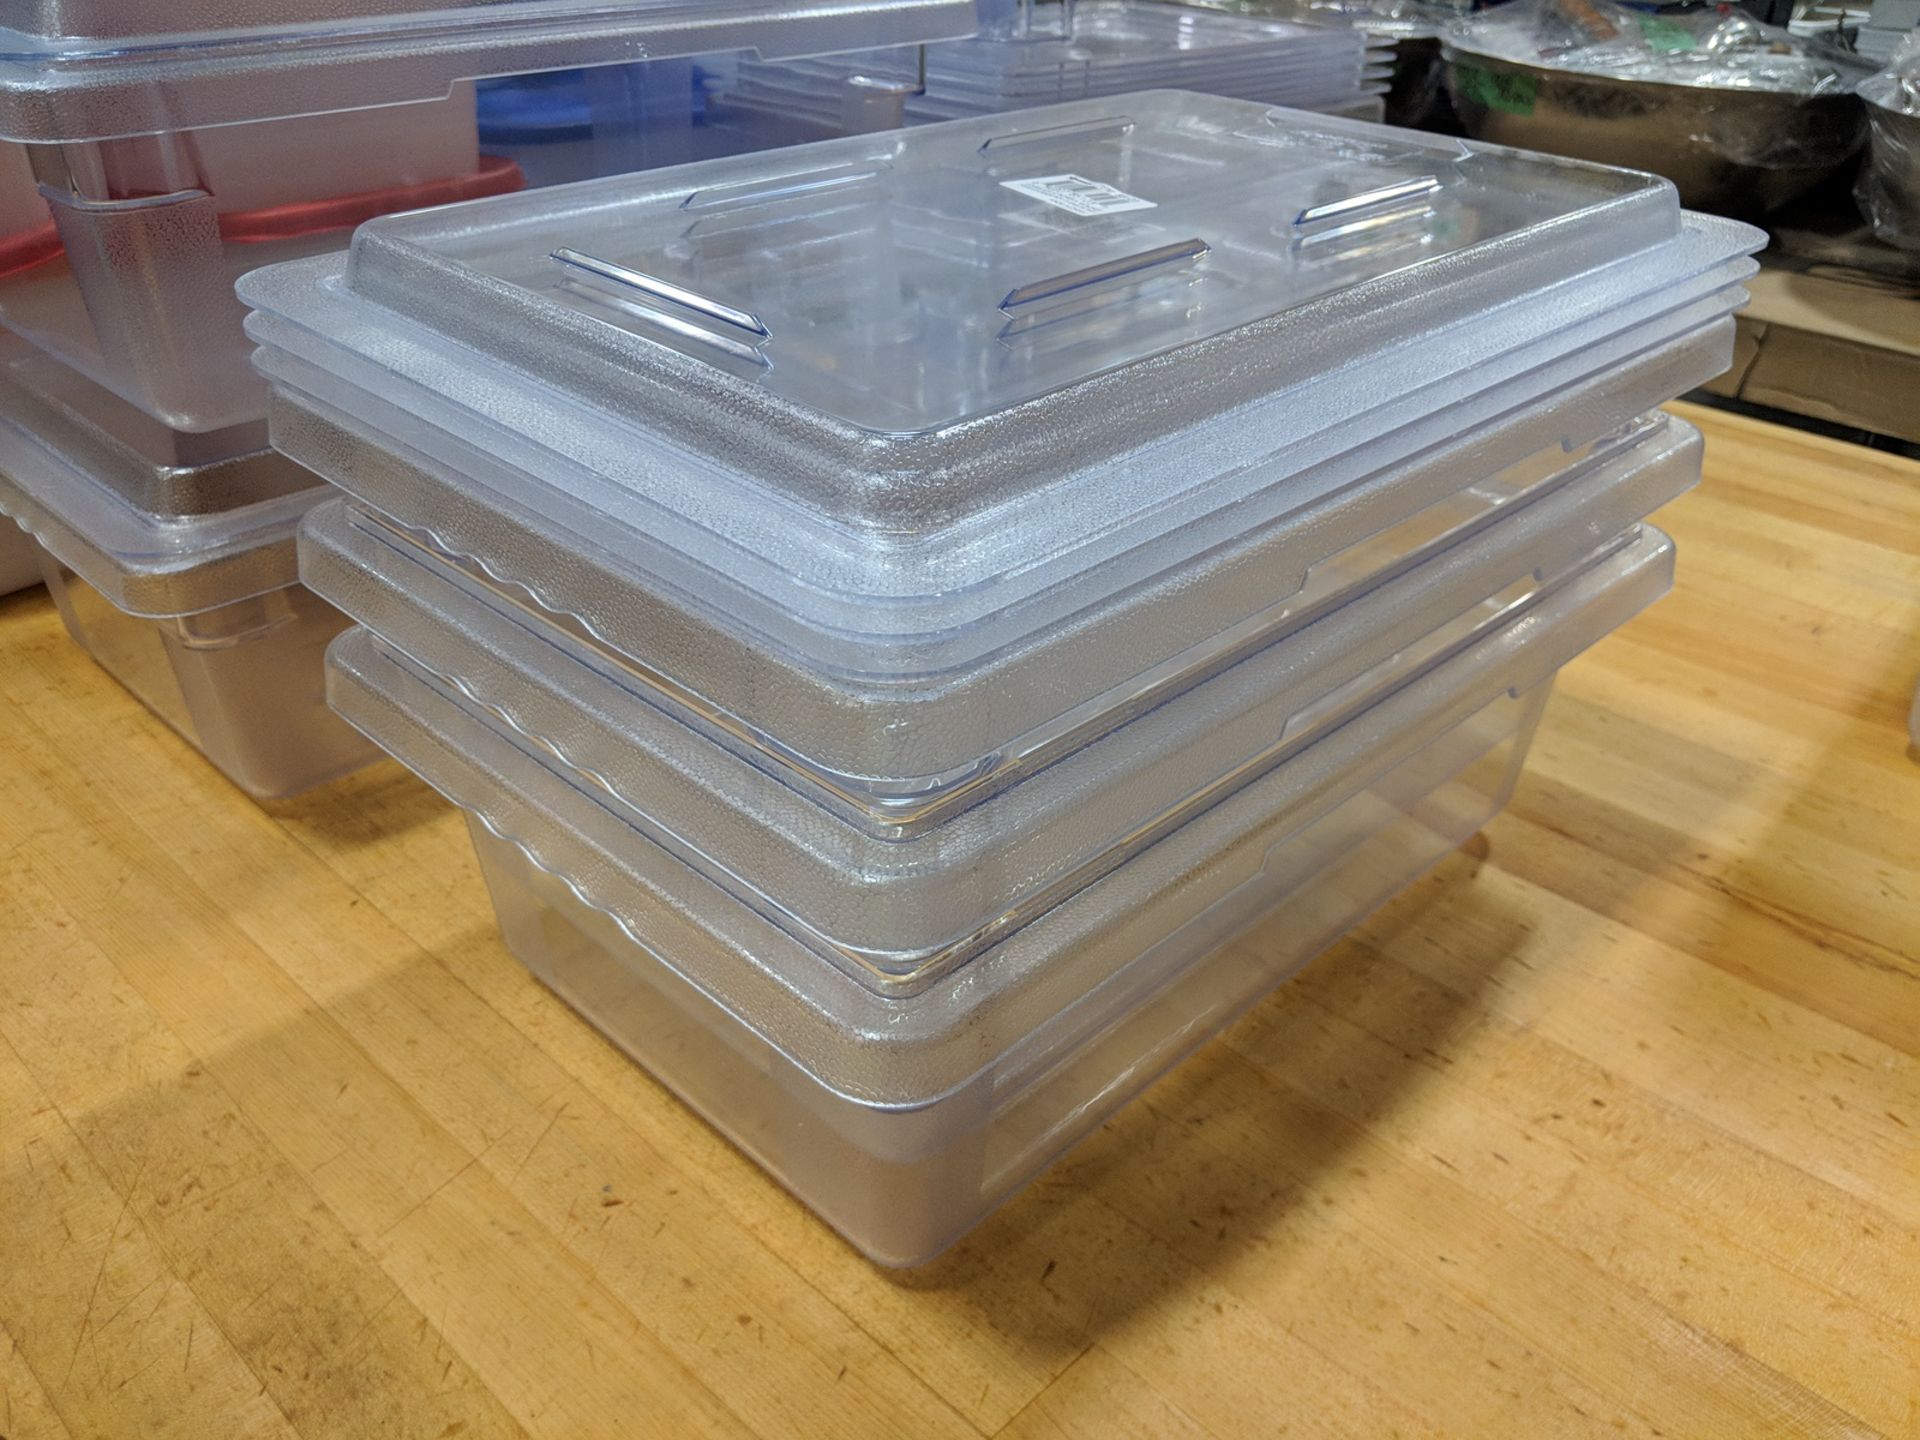 12" x 18" x 6" Polycarb Food Storage Containers with Lids - Lot of 3 (6 Pcs) - Image 5 of 8